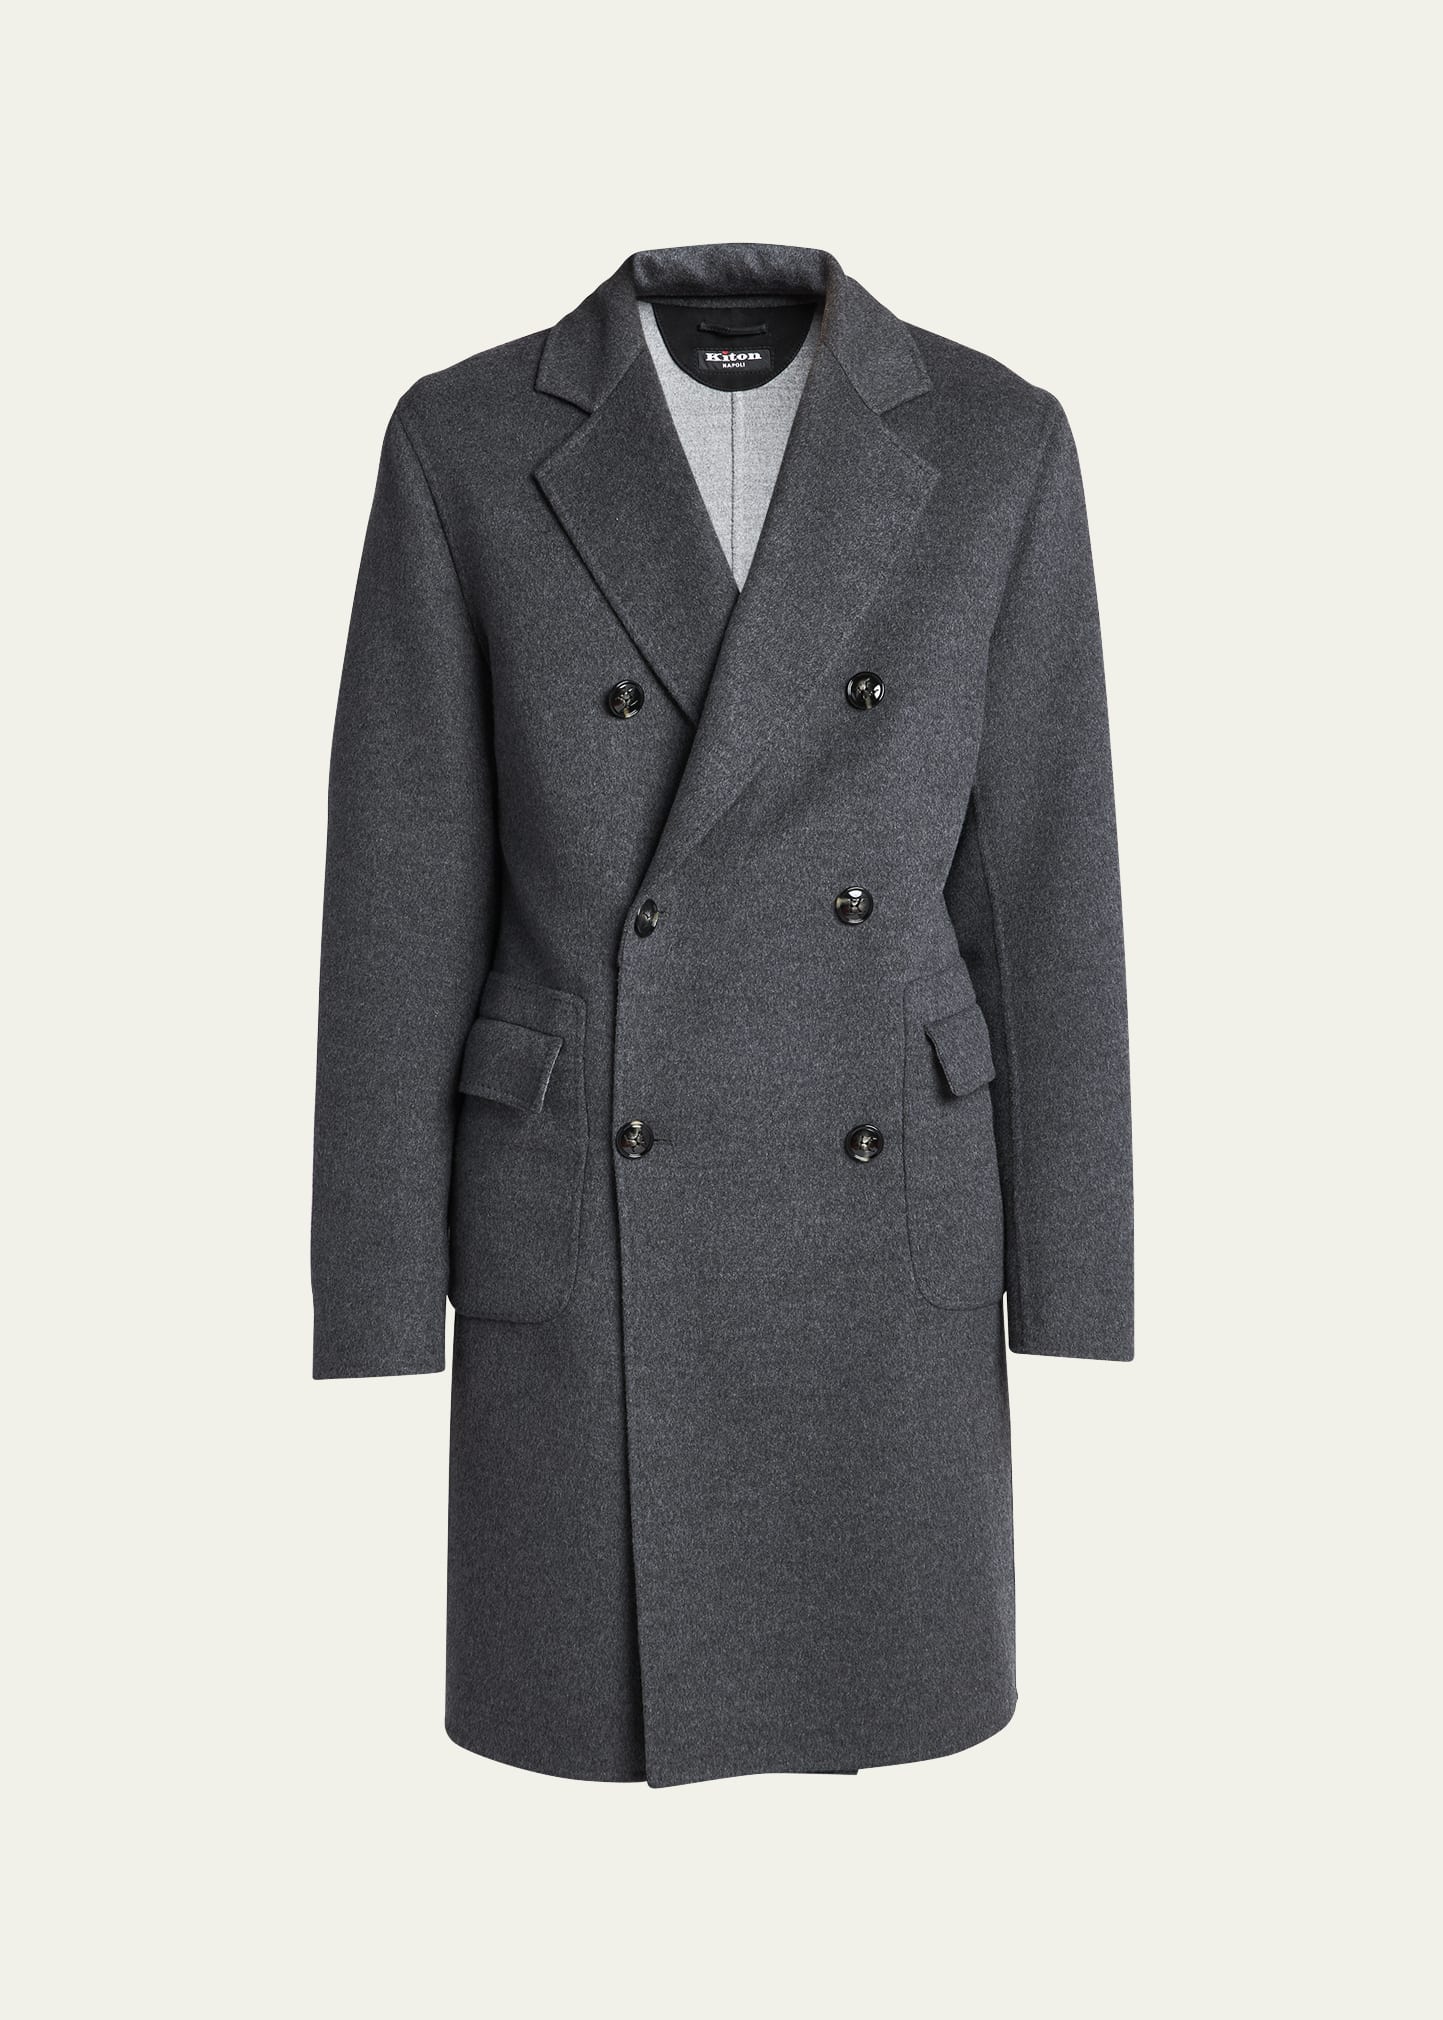 Men's Cashmere-Wool Double-Breasted Overcoat